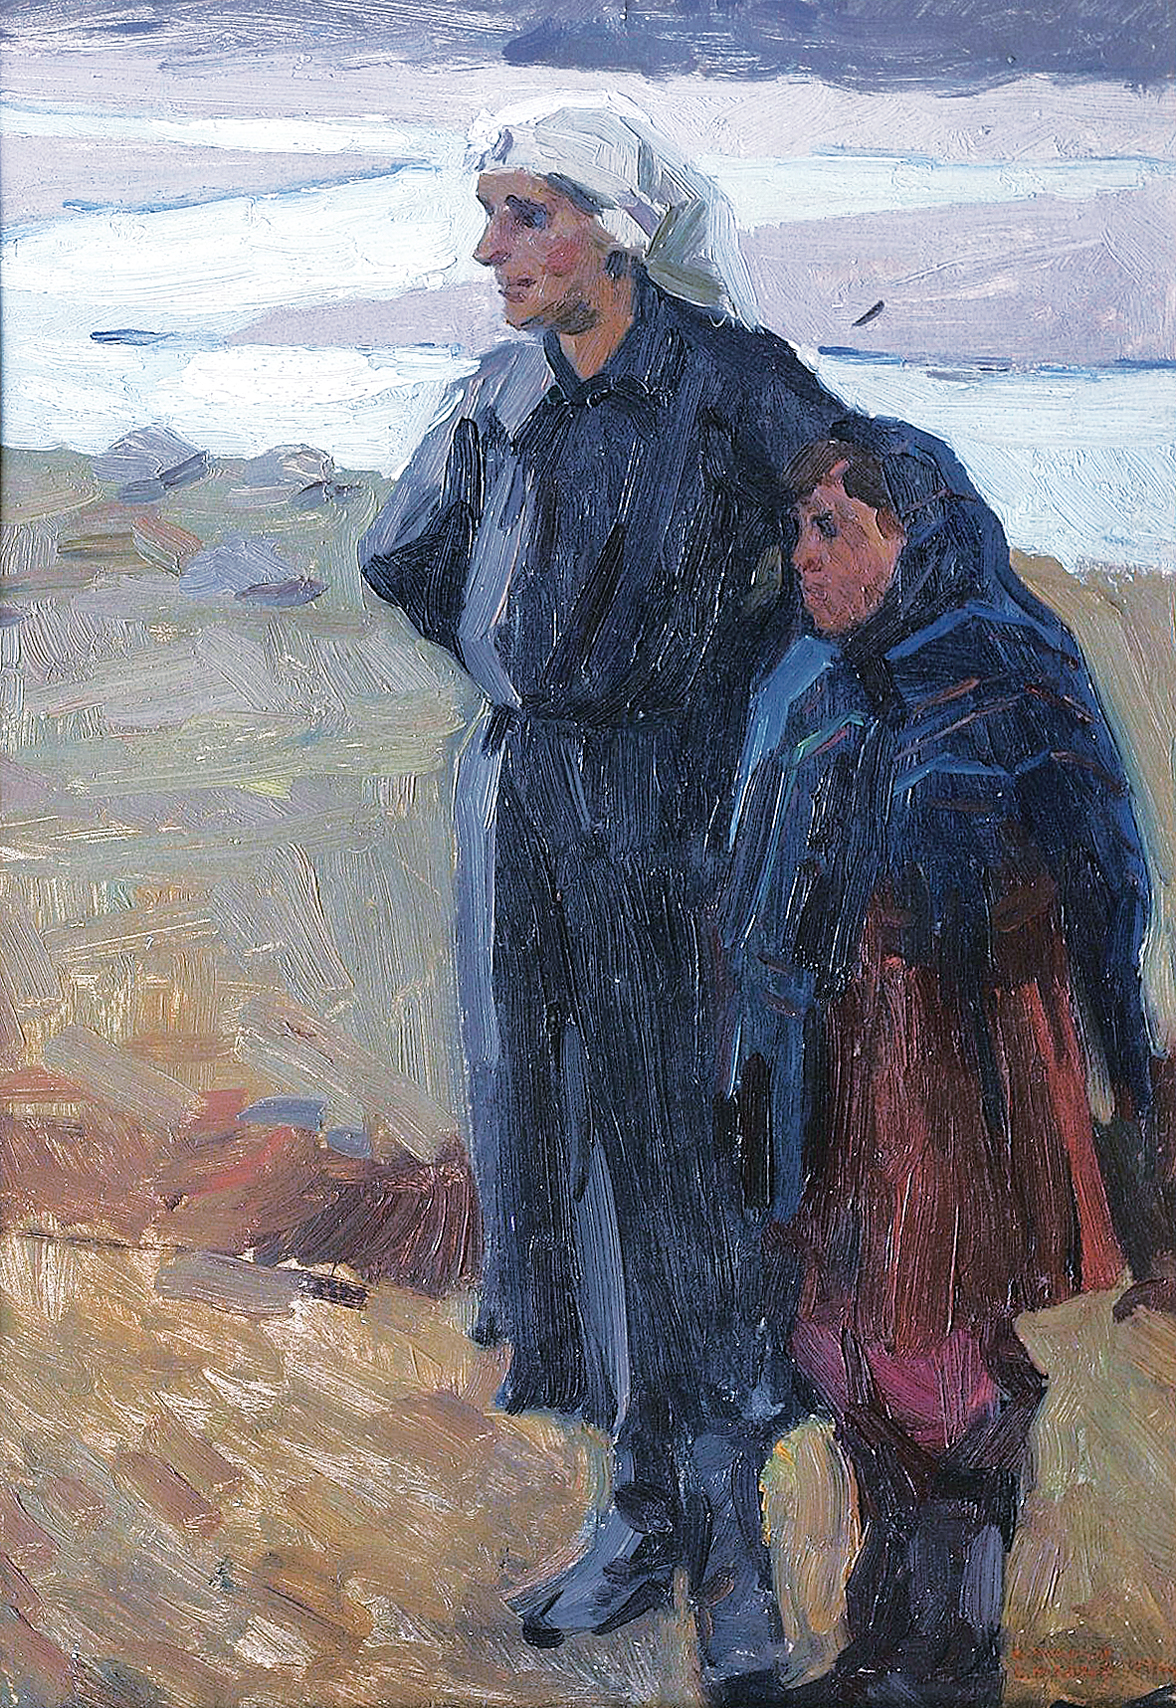 Mother and daughter, waiting at the seashore